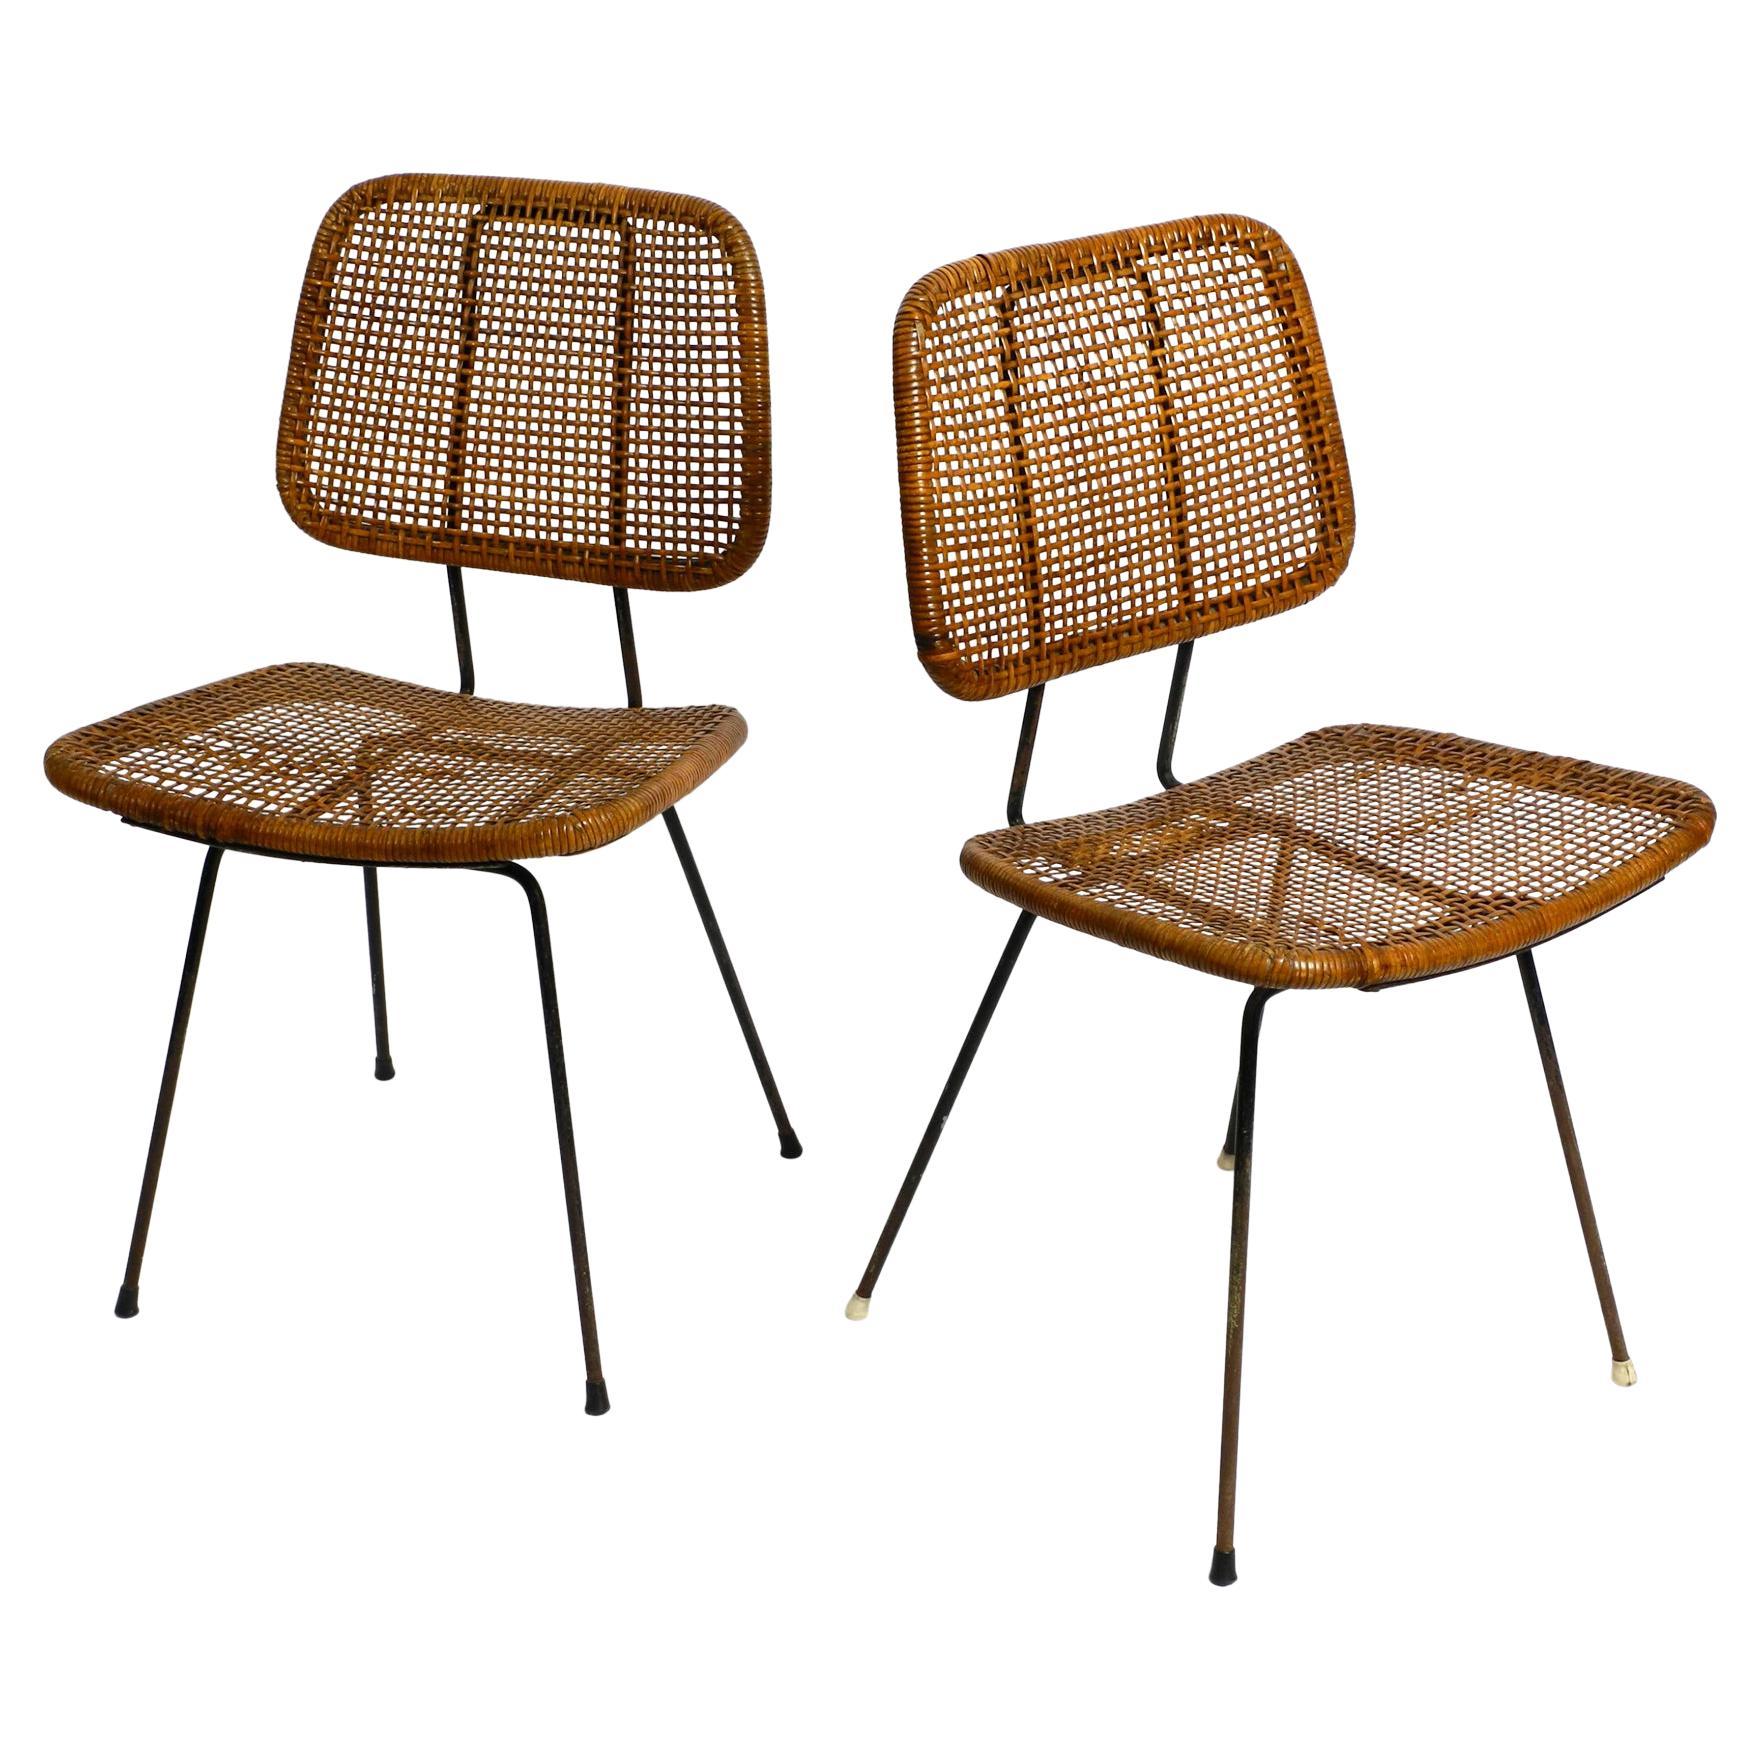 Two 1960s Italian Bamboo Dining Room Chairs in a Very Good Vintage Condition For Sale